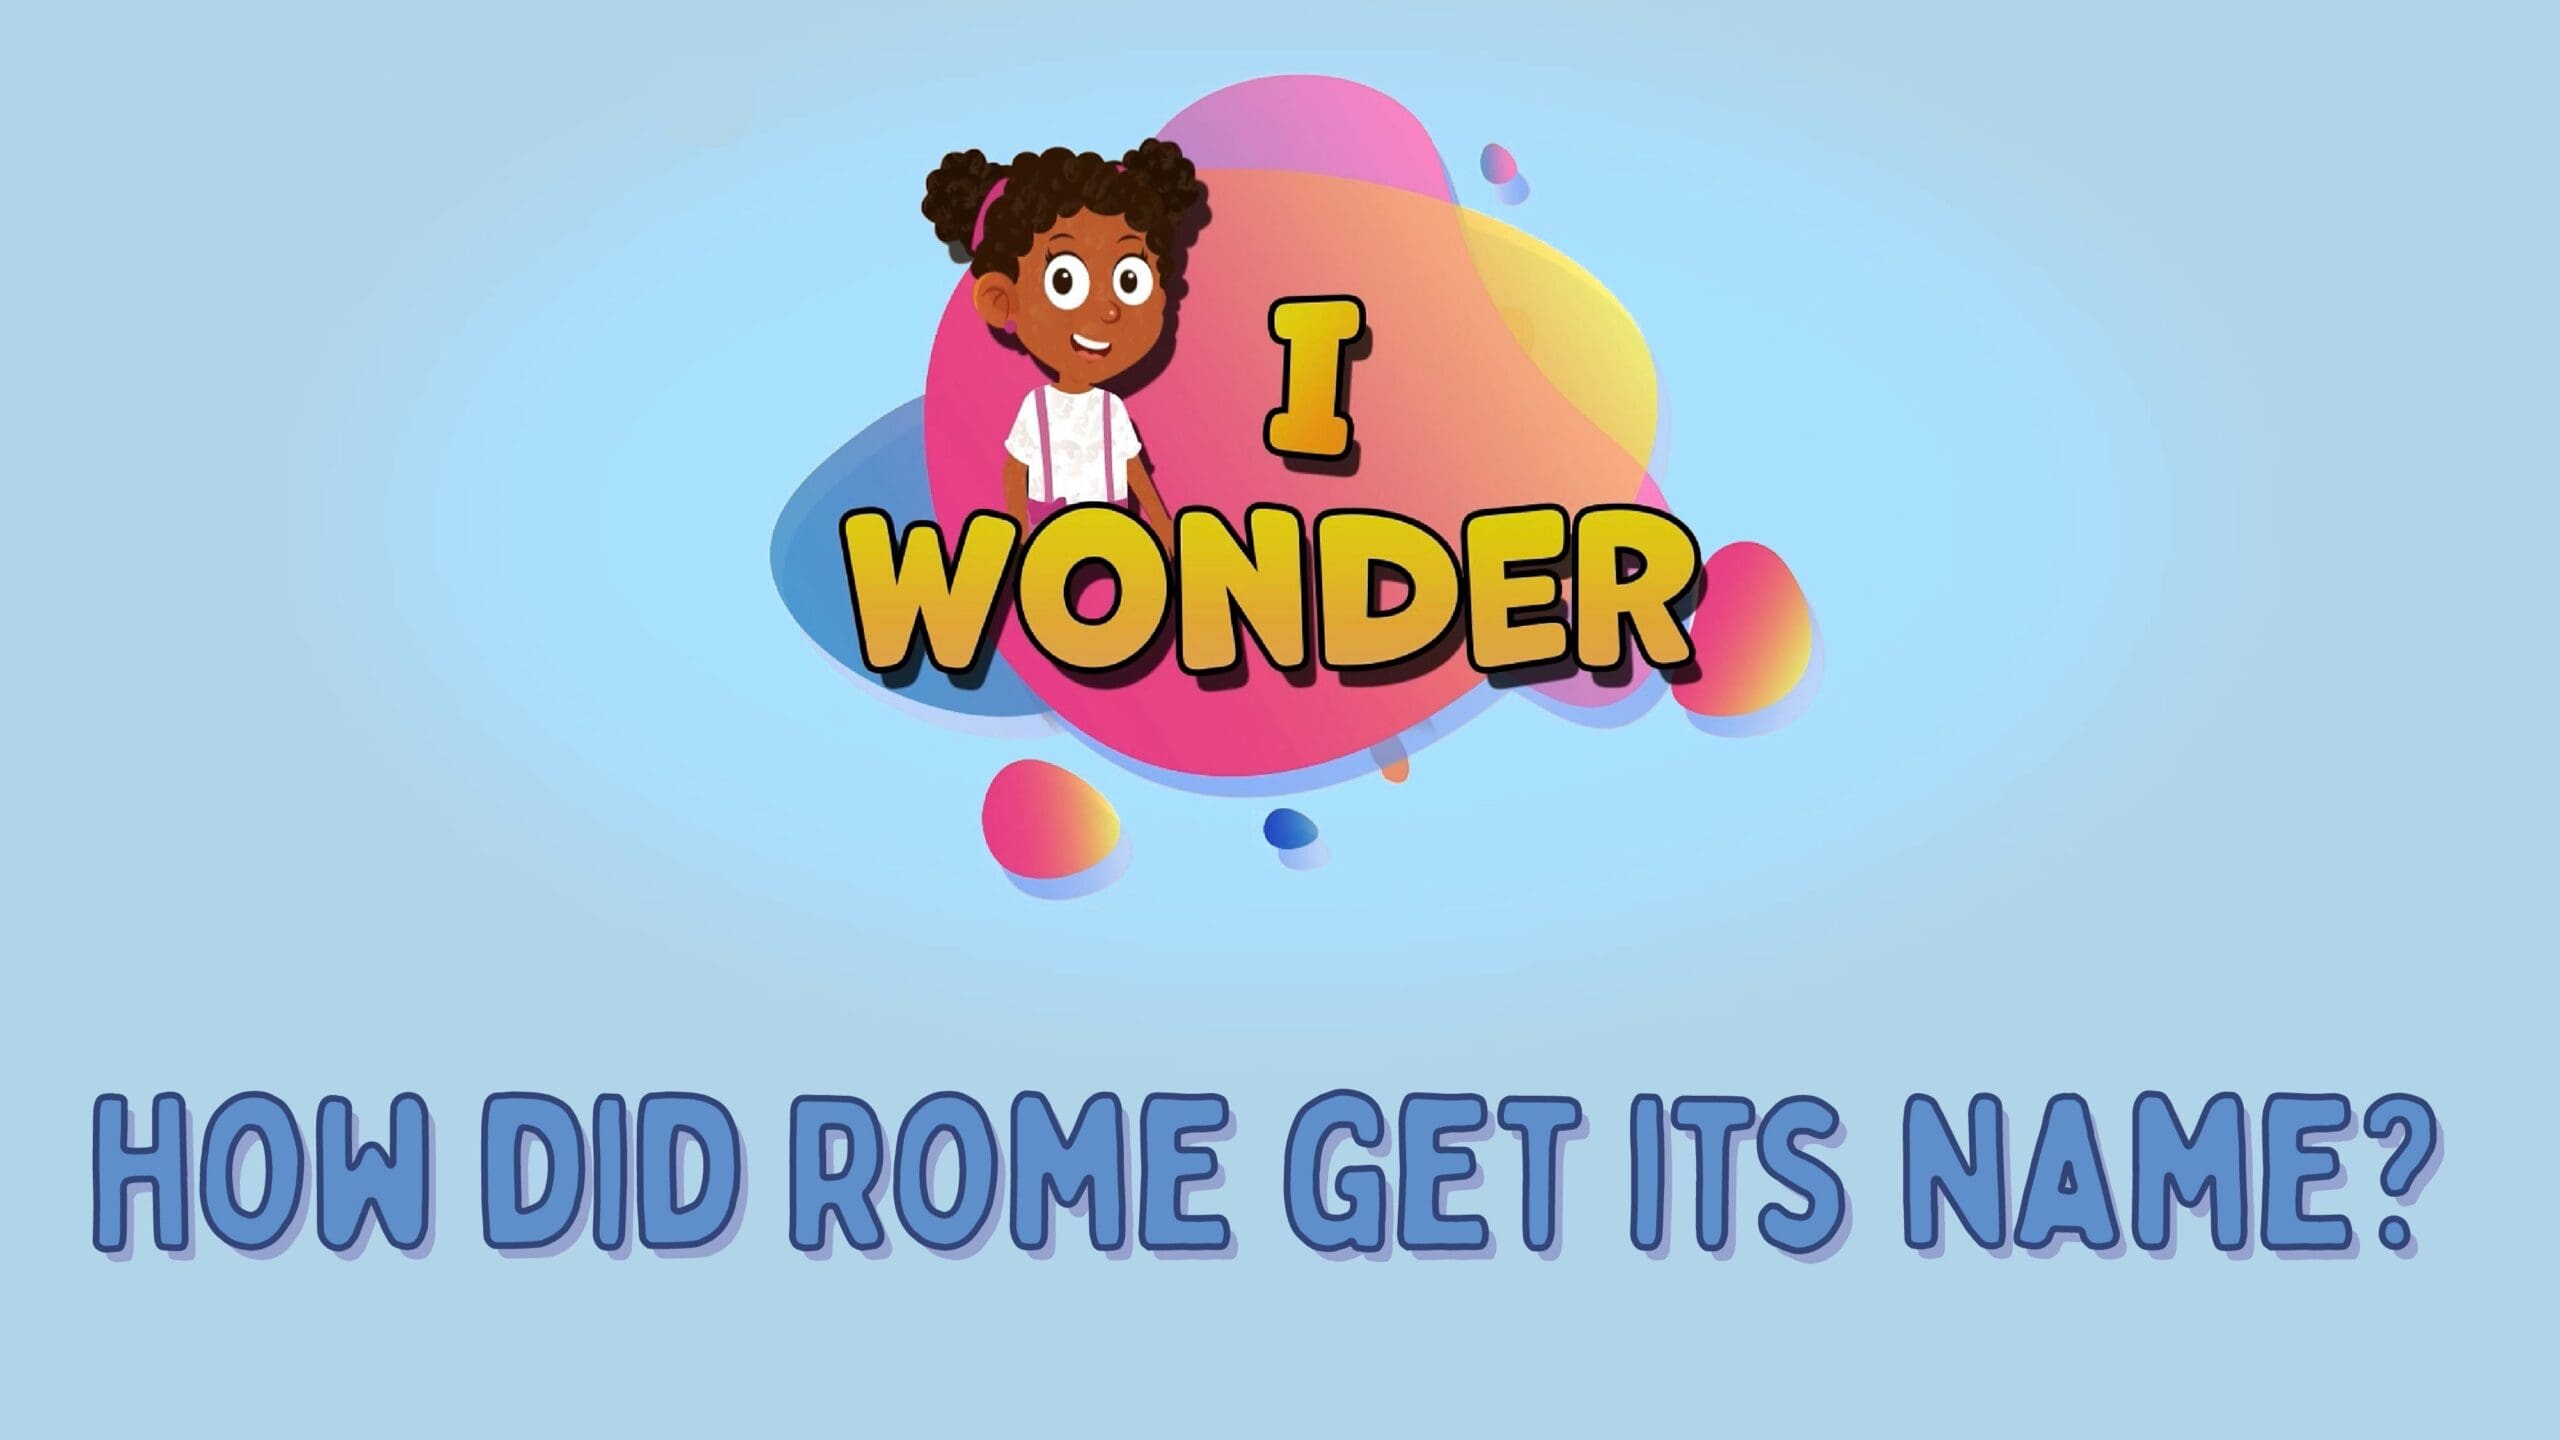 How did Rome get its name